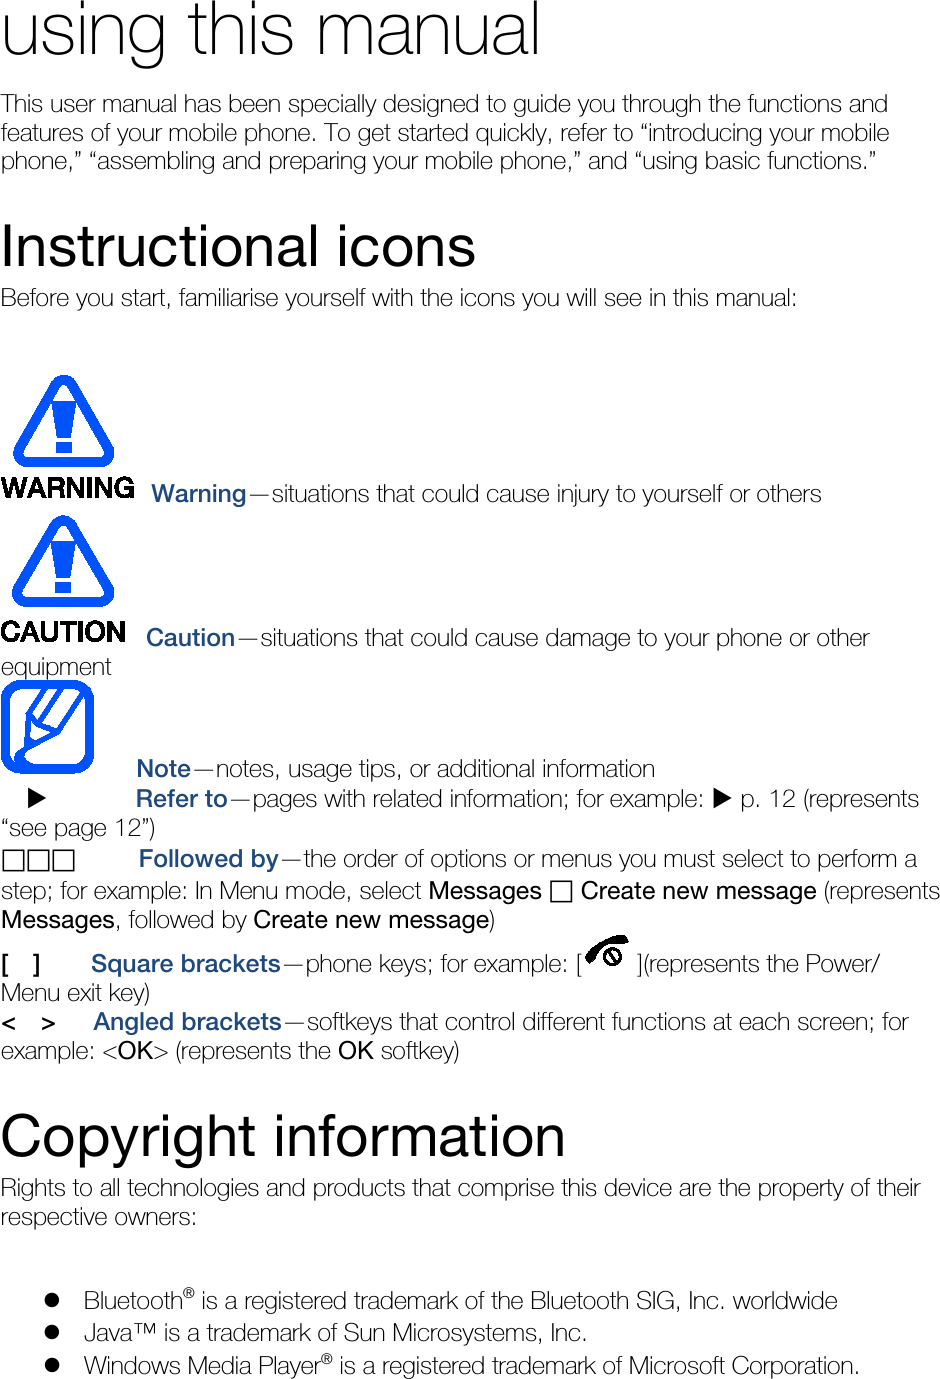 using this manual This user manual has been specially designed to guide you through the functions and features of your mobile phone. To get started quickly, refer to “introducing your mobile phone,” “assembling and preparing your mobile phone,” and “using basic functions.”  Instructional icons Before you start, familiarise yourself with the icons you will see in this manual:     Warning—situations that could cause injury to yourself or others  Caution—situations that could cause damage to your phone or other equipment    Note—notes, usage tips, or additional information          Refer to—pages with related information; for example:  p. 12 (represents “see page 12”) ฀฀฀     Followed by—the order of options or menus you must select to perform a step; for example: In Menu mode, select Messages ฀ Create new message (represents Messages, followed by Create new message) [  ]    Square brackets—phone keys; for example: [ ](represents the Power/ Menu exit key) &lt;  &gt;   Angled brackets—softkeys that control different functions at each screen; for example: &lt;OK&gt; (represents the OK softkey)  Copyright information Rights to all technologies and products that comprise this device are the property of their respective owners:   Bluetooth® is a registered trademark of the Bluetooth SIG, Inc. worldwide  Java™ is a trademark of Sun Microsystems, Inc.  Windows Media Player® is a registered trademark of Microsoft Corporation. 